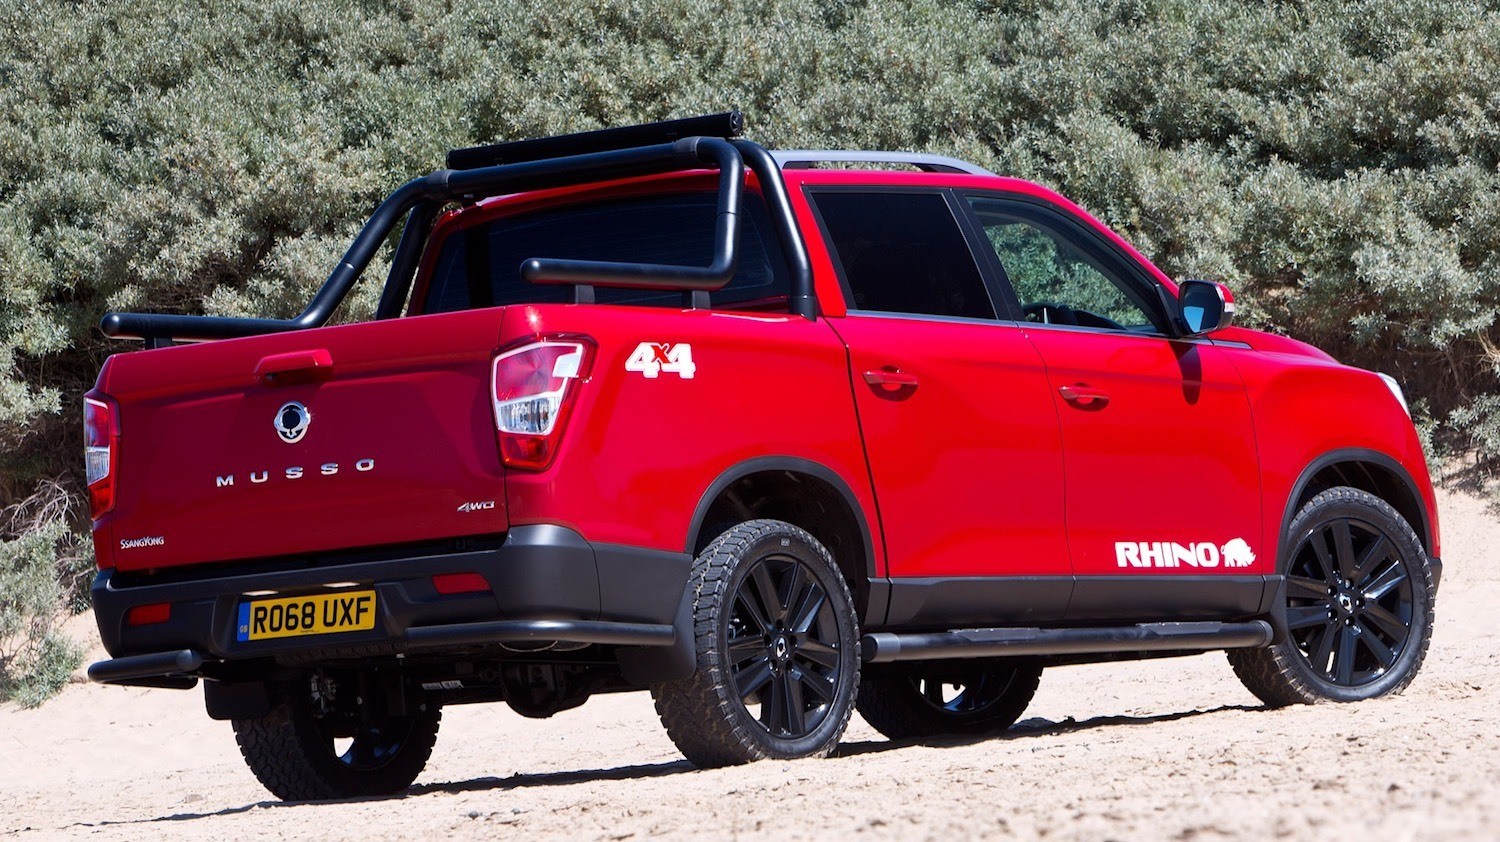 drive-Tim Barnes-Clay Carwrite-ups reviews the New SsangYong Musso Pick-Up 2018 9